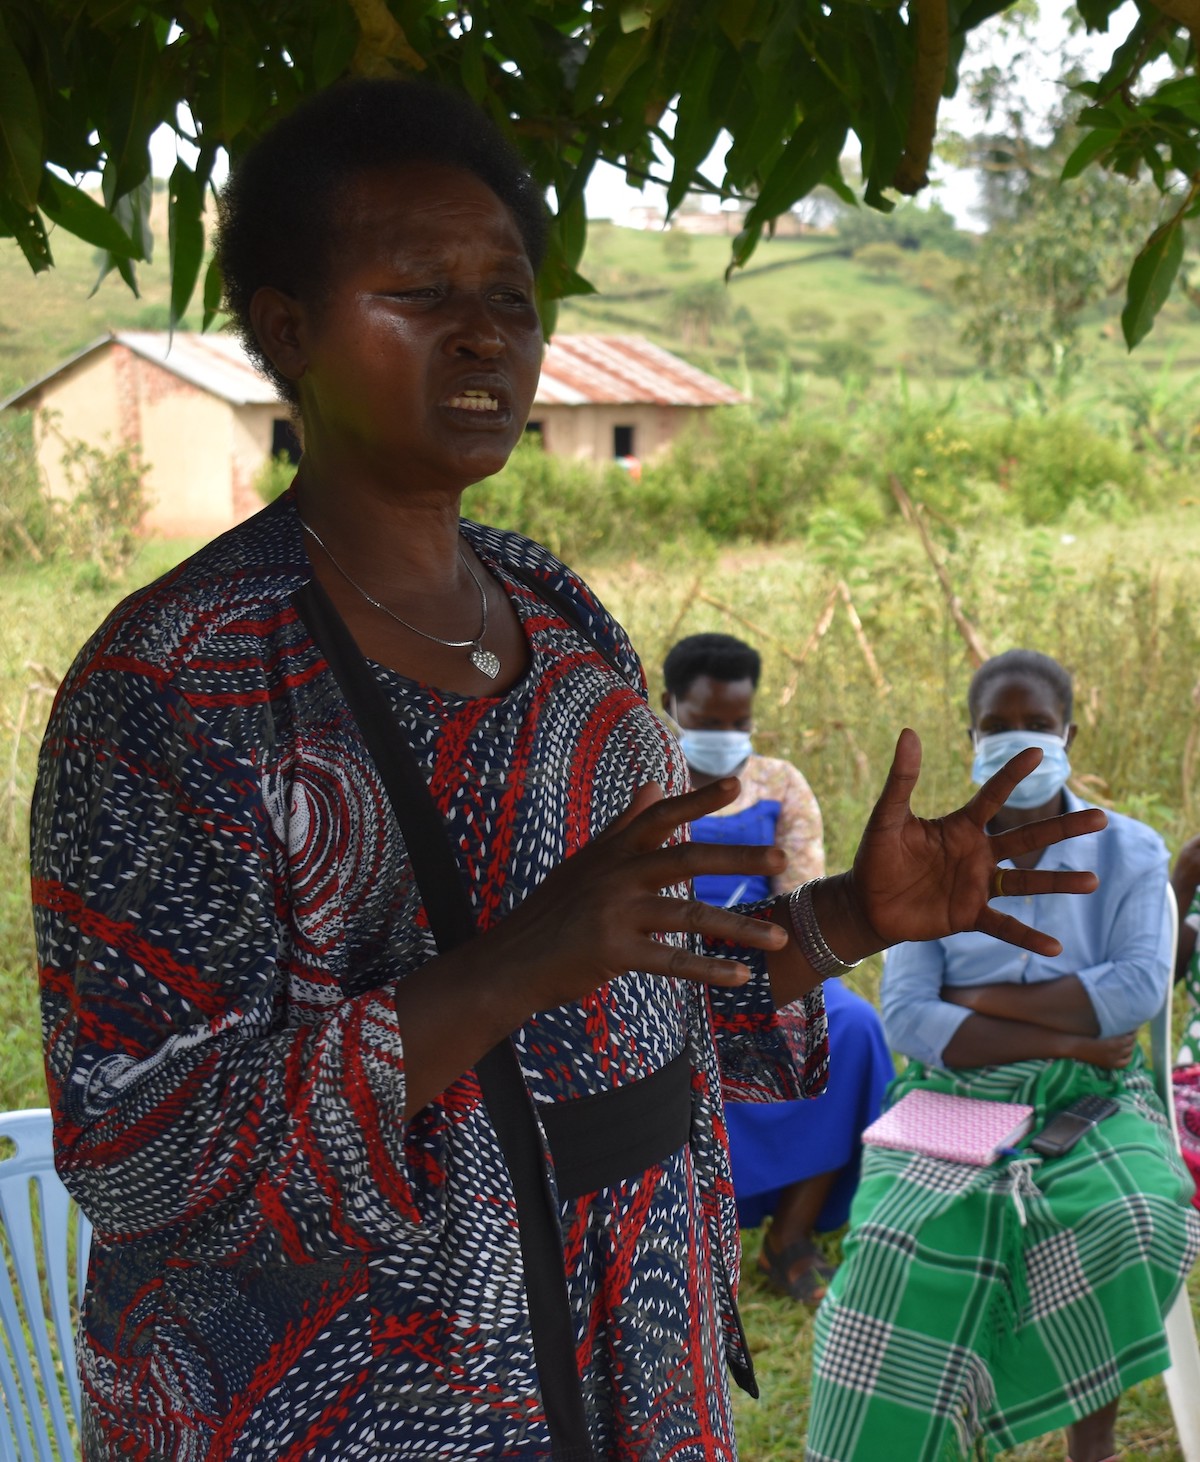 Jolly, speaking to women in her community on peace building and mediation. Photo credit: CoACT